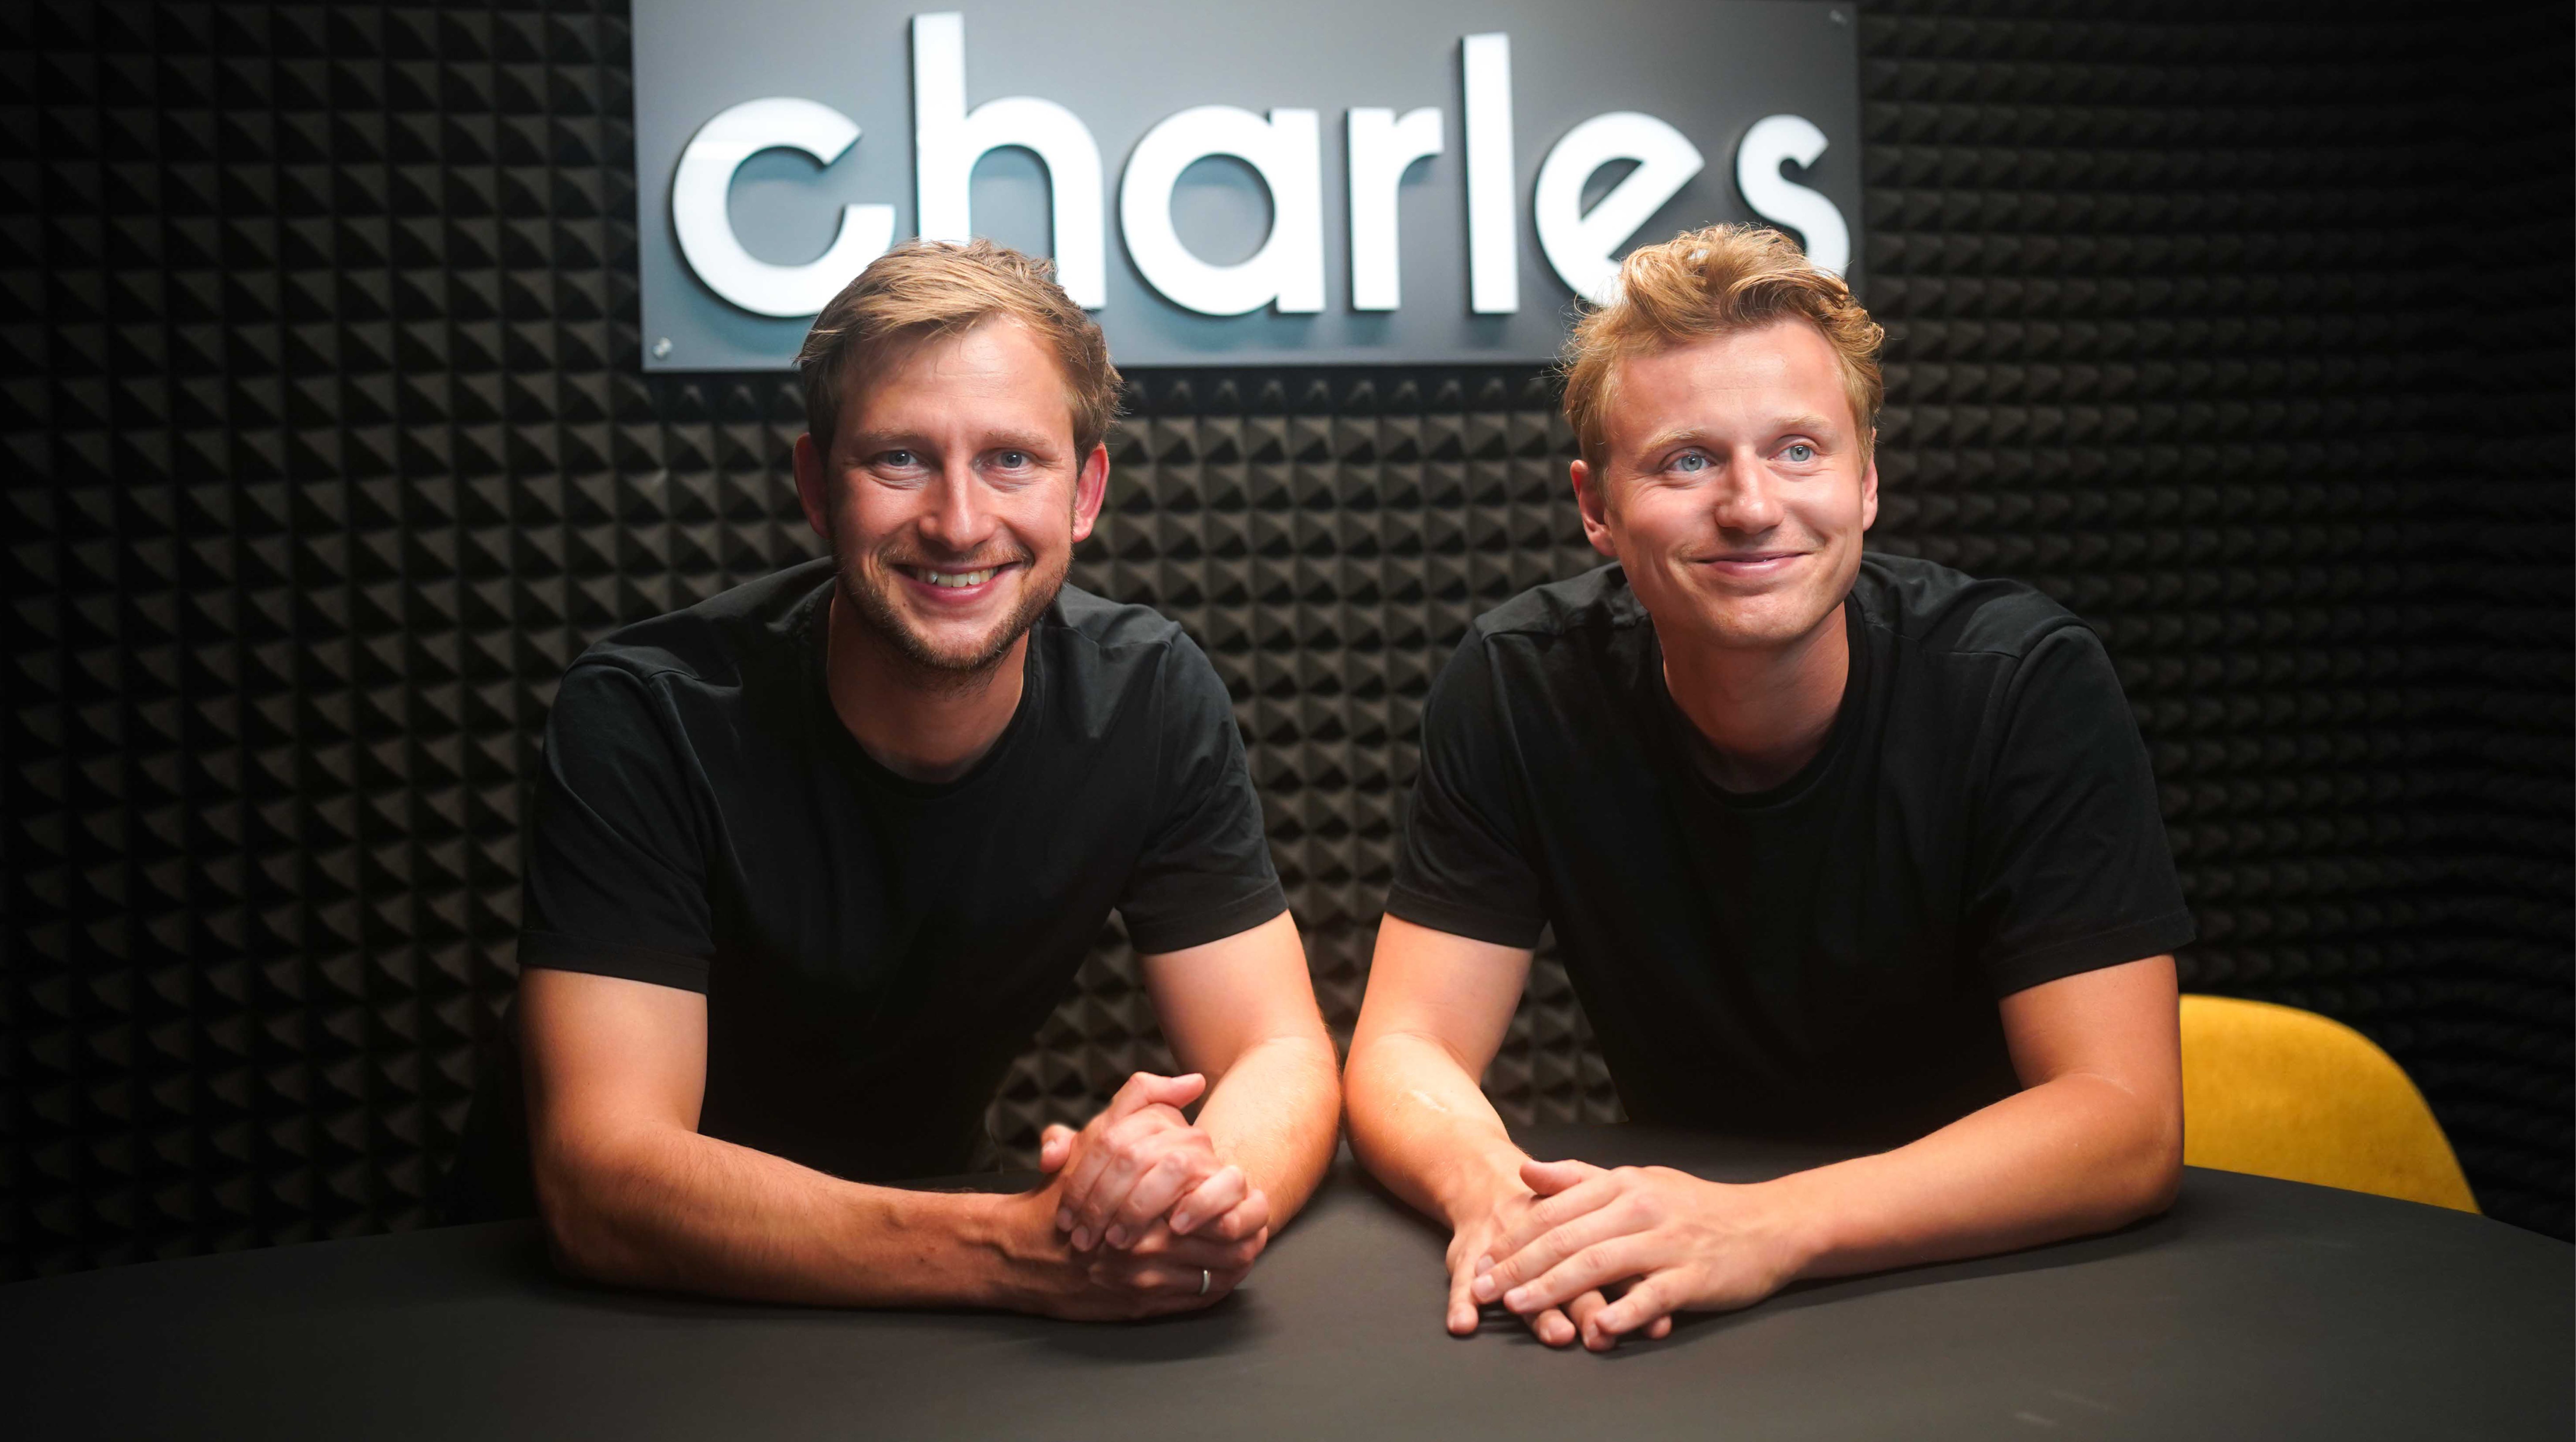 Charles raises $20M Series A led by Salesforce Ventures to unlock eCommerce in WhatsApp